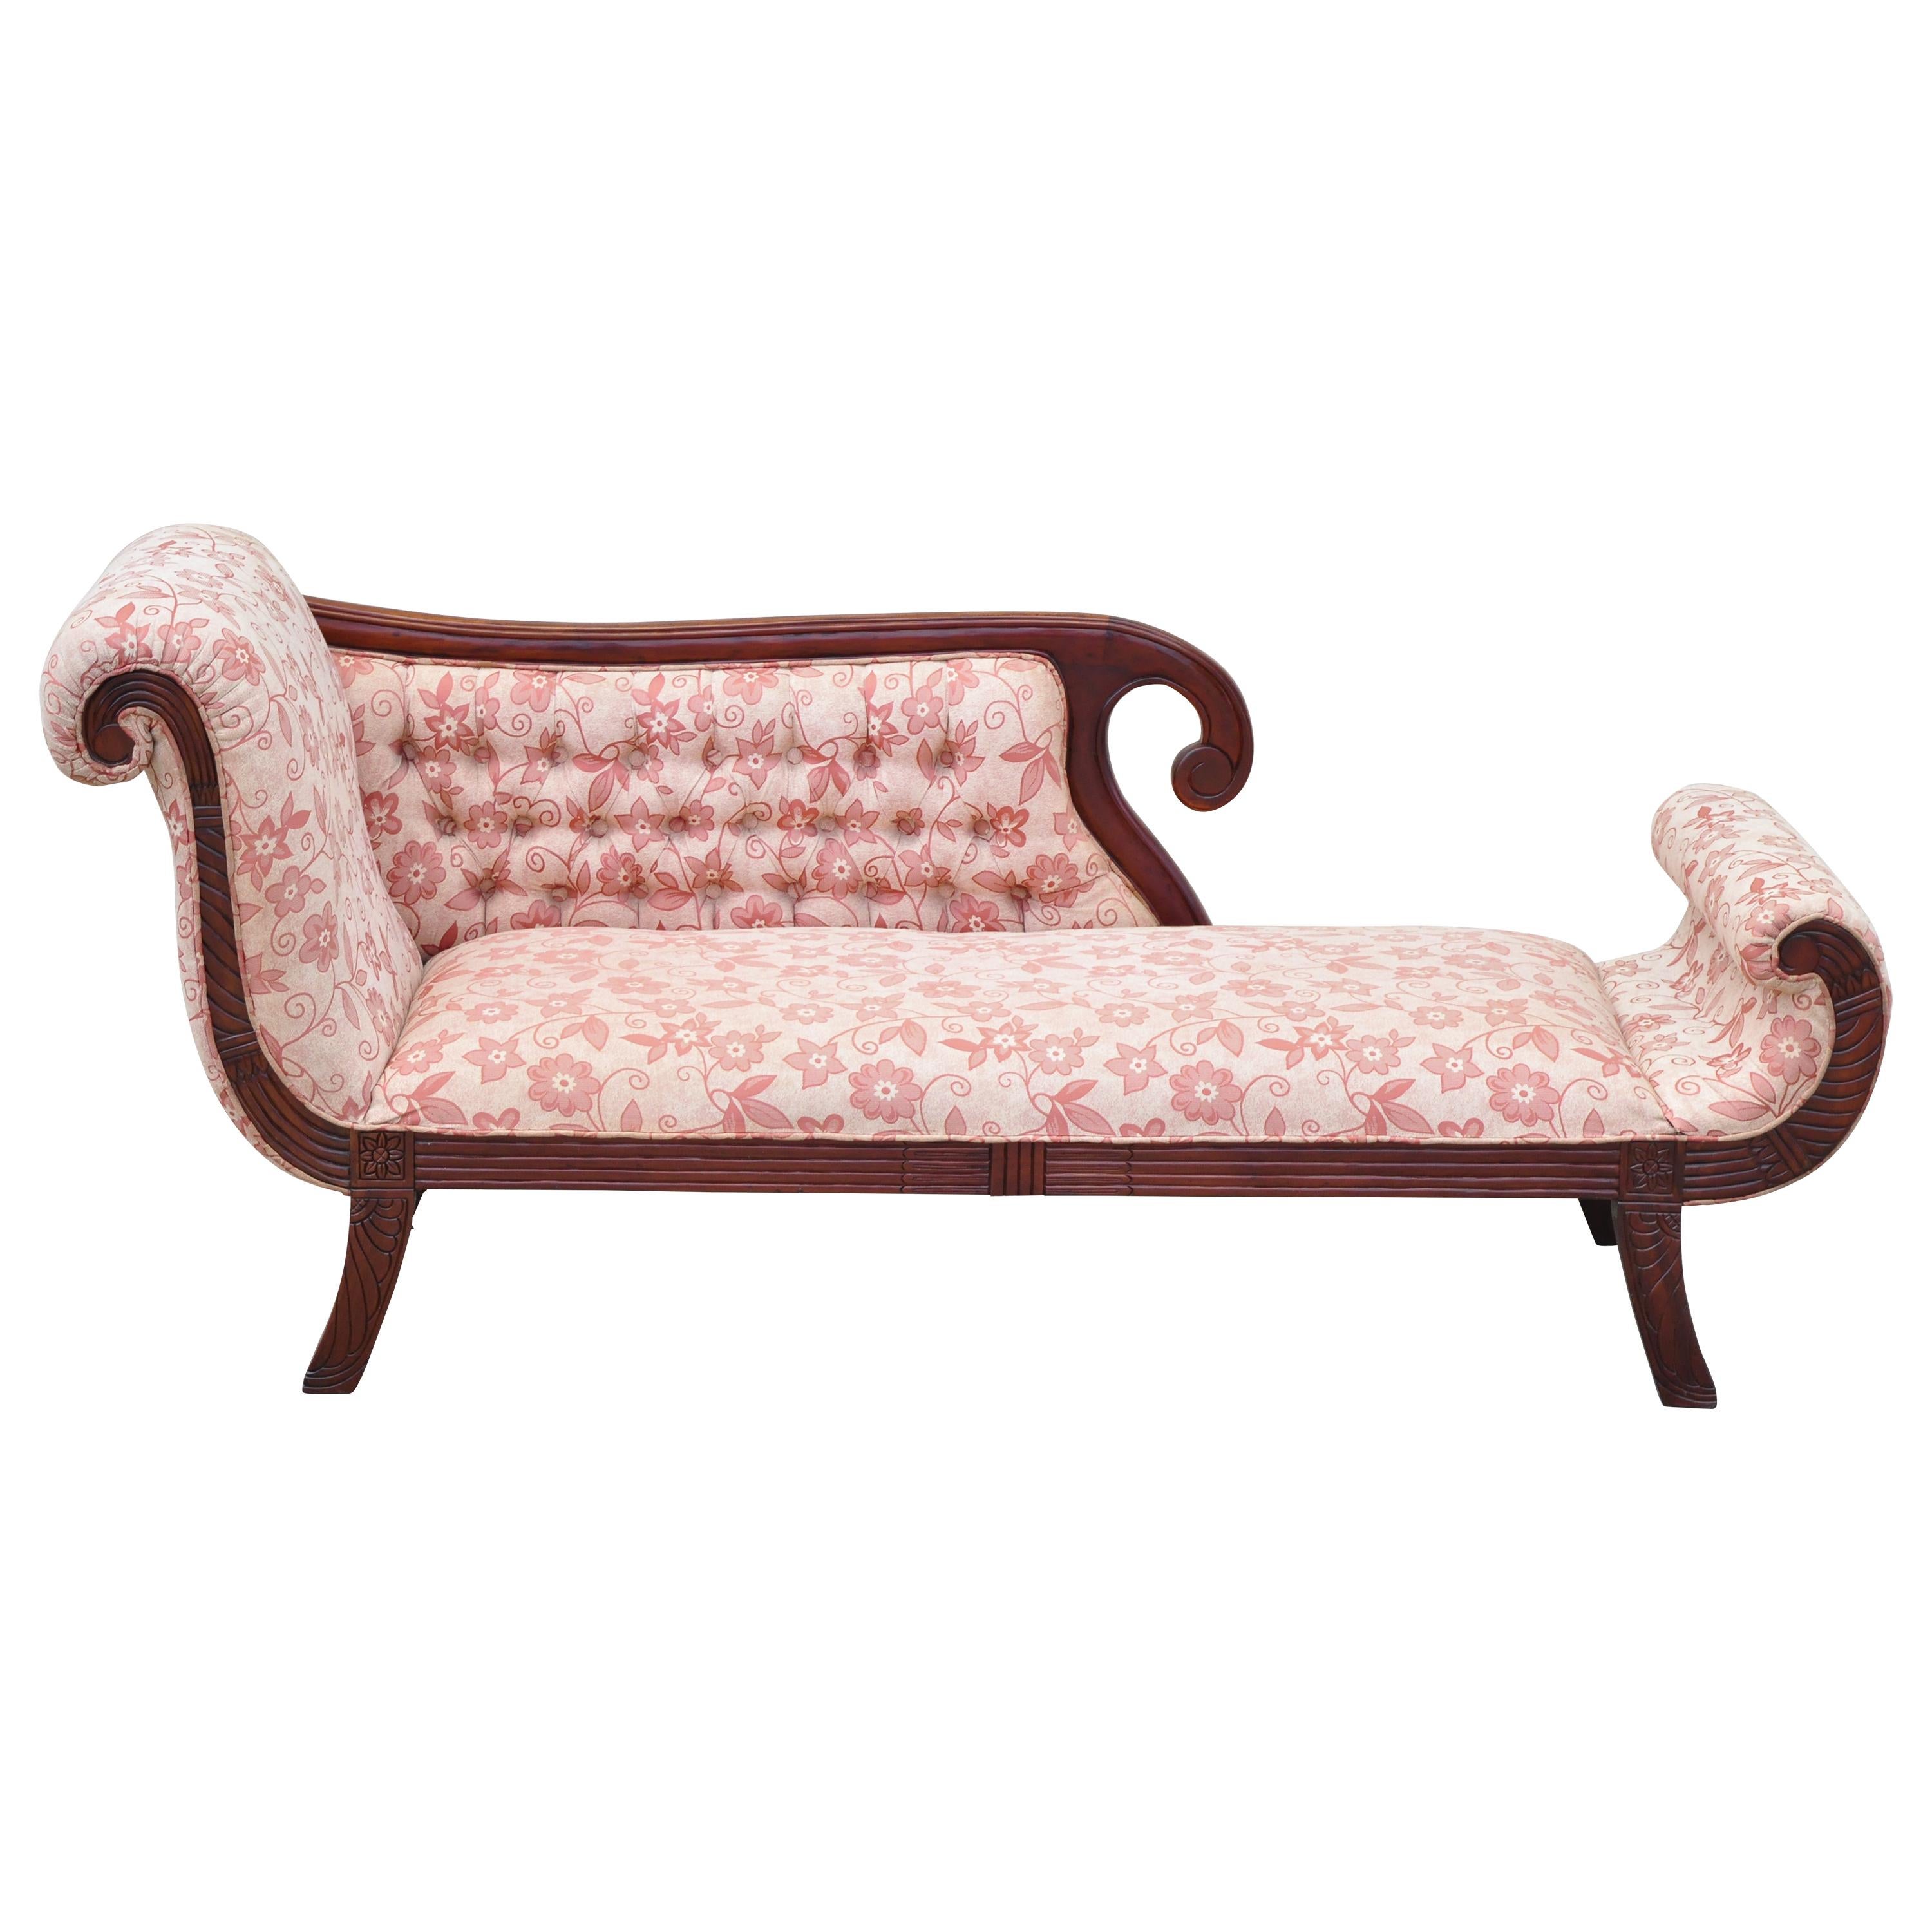 Mahogany Frame American Empire Style Fainting Couch Sofa Chaise Lounge